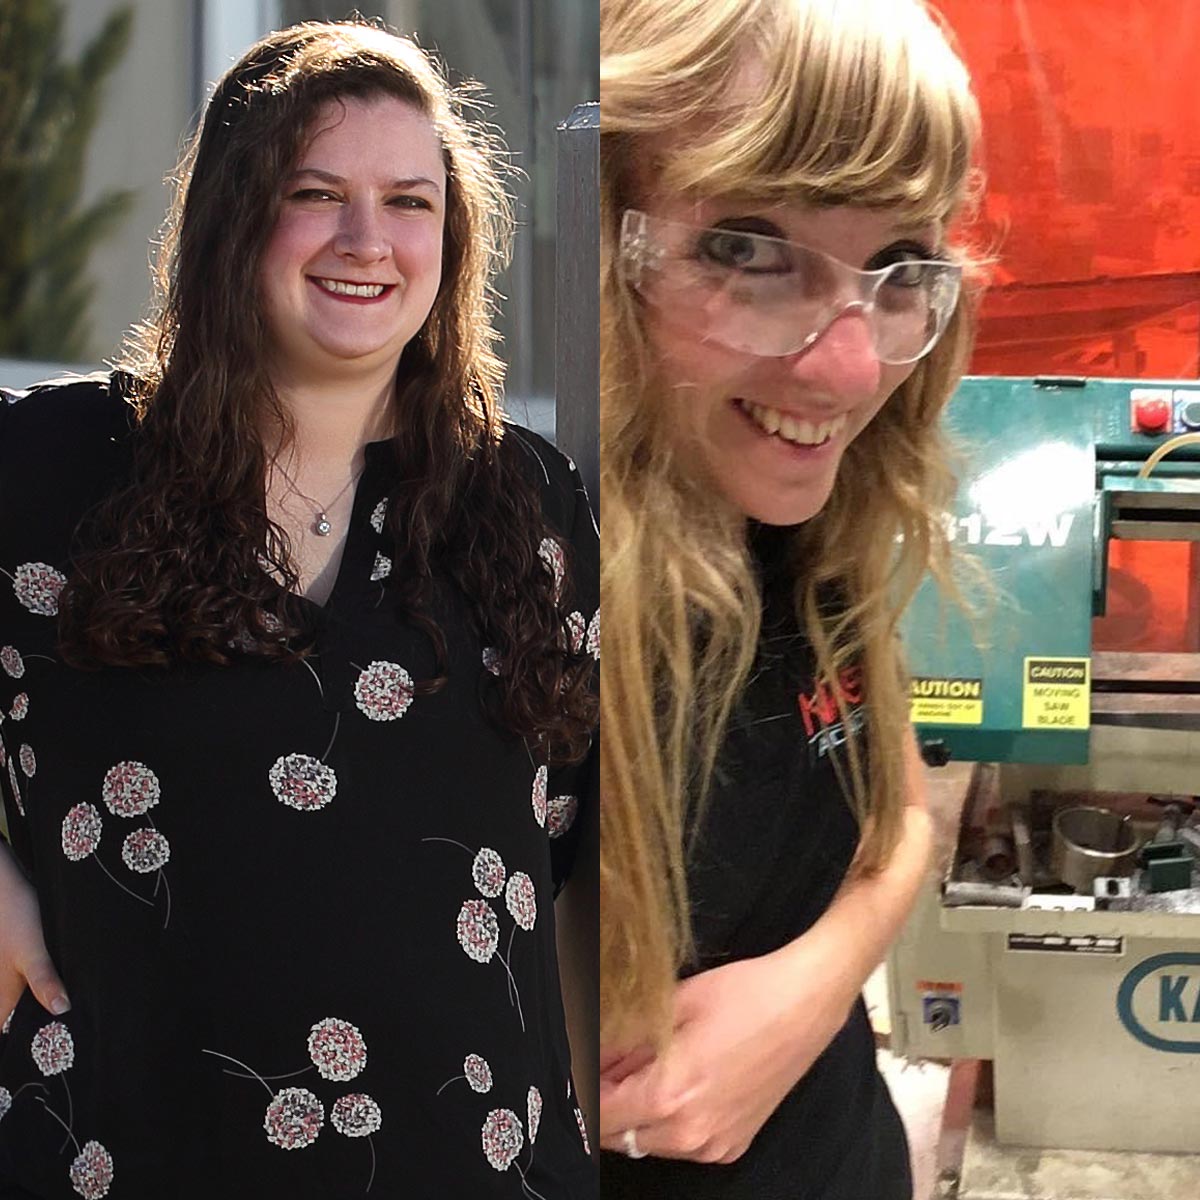 Nuclear engineering graduate students Kristen Geddes and Robin Roper spent their summer working to make nuclear energy safer, more sustainable and more accepted by the general public.